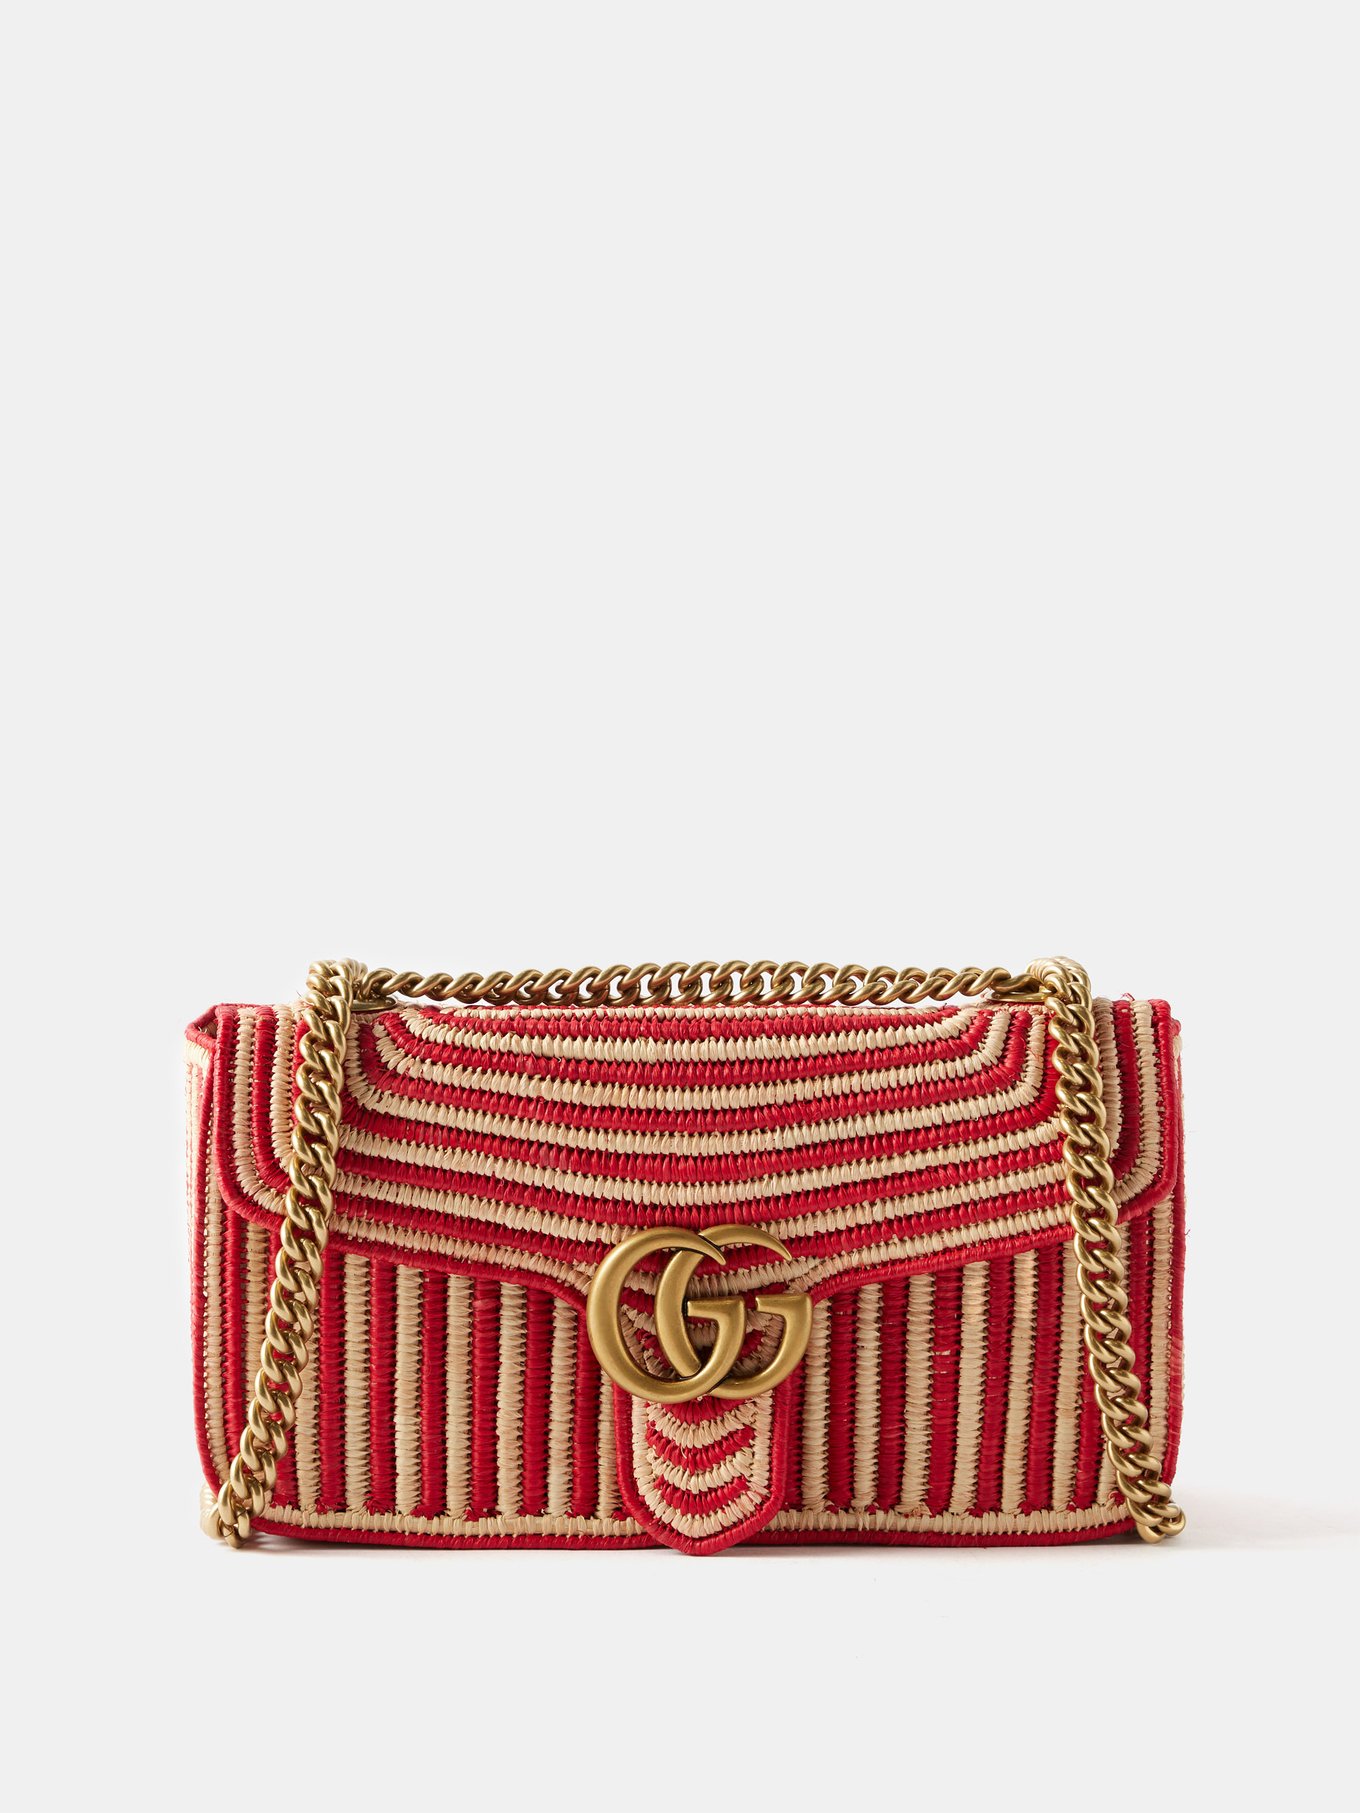 Gucci GG Marmont Matelasse Key Case - Red Wallets, Accessories - GUC498889